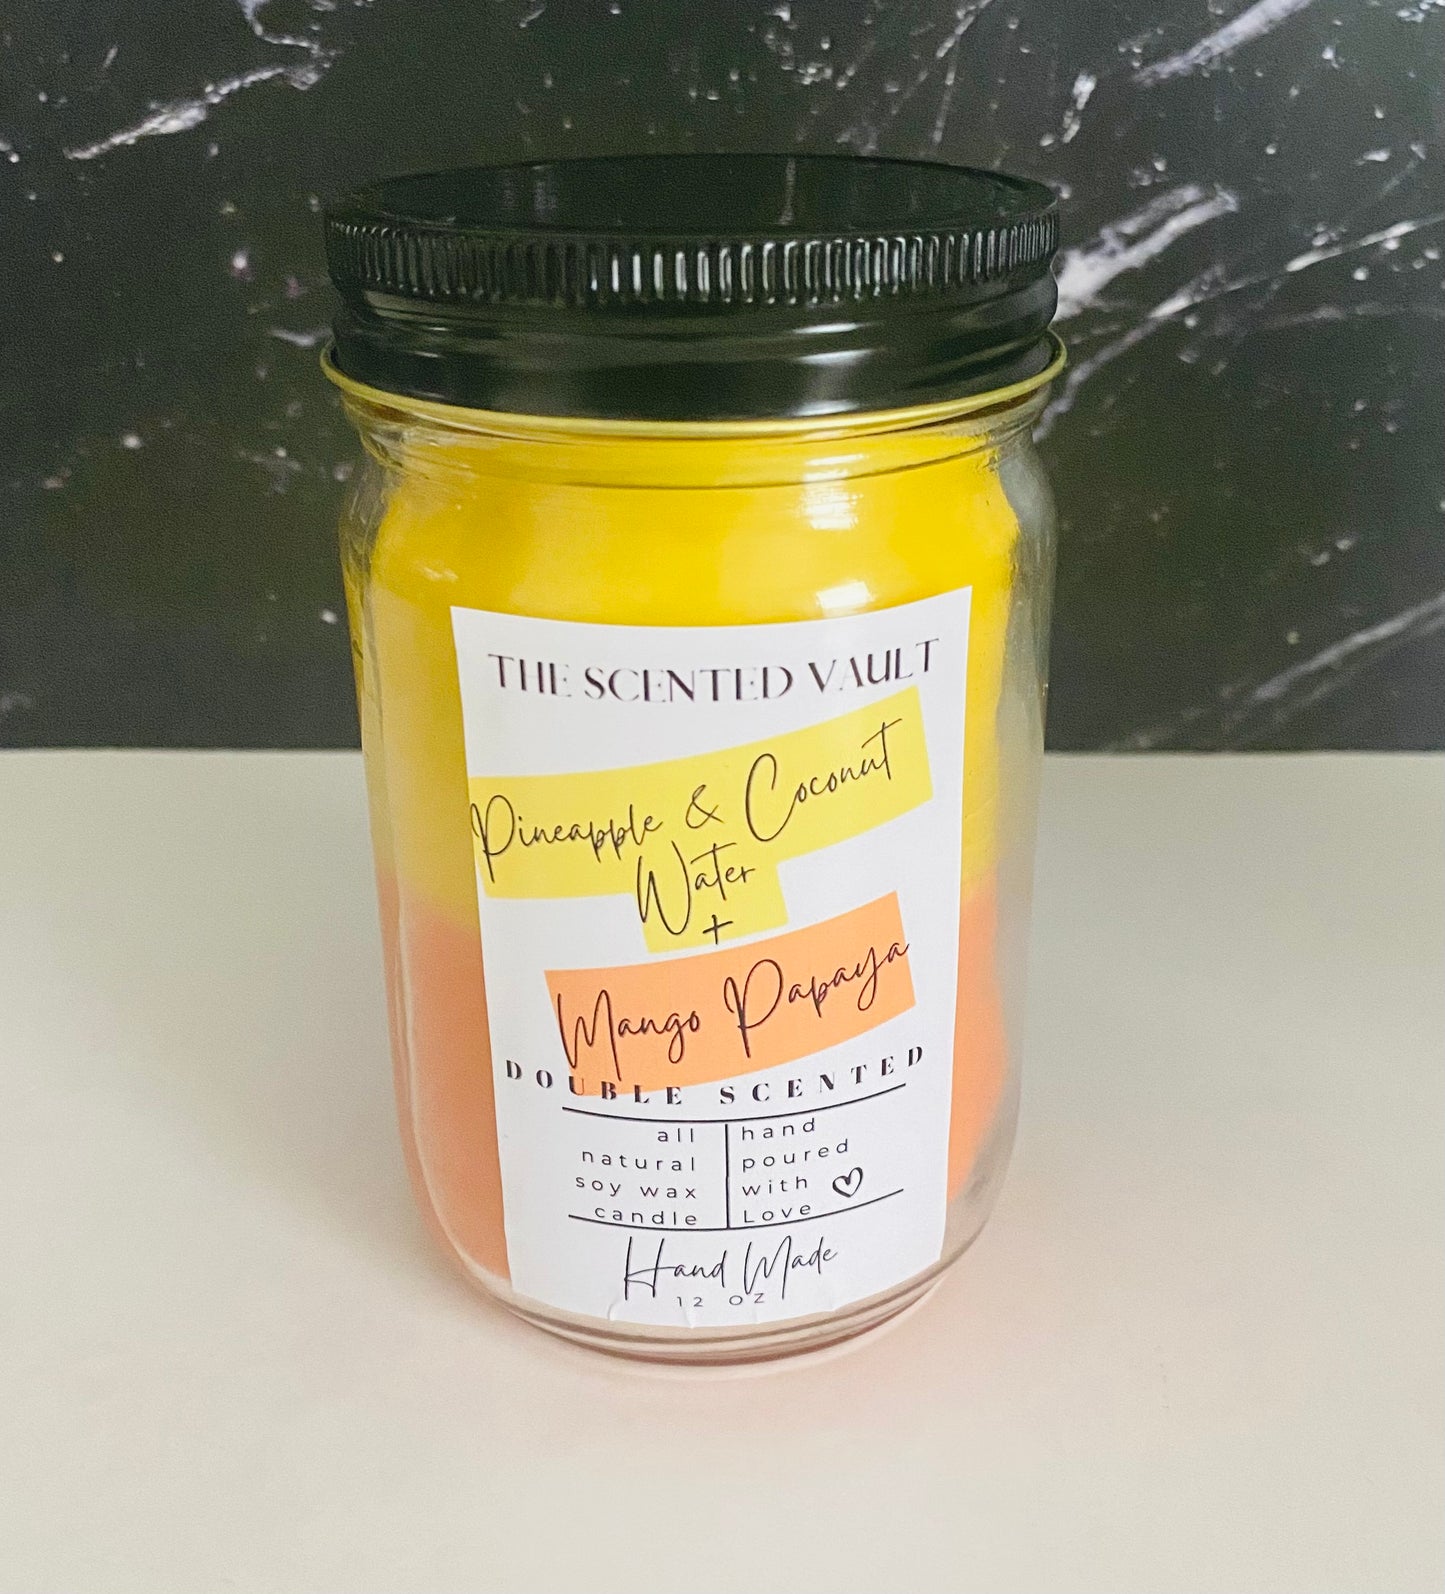 Pineapple Coconut Water & Mango Papaya Double Scented Candle